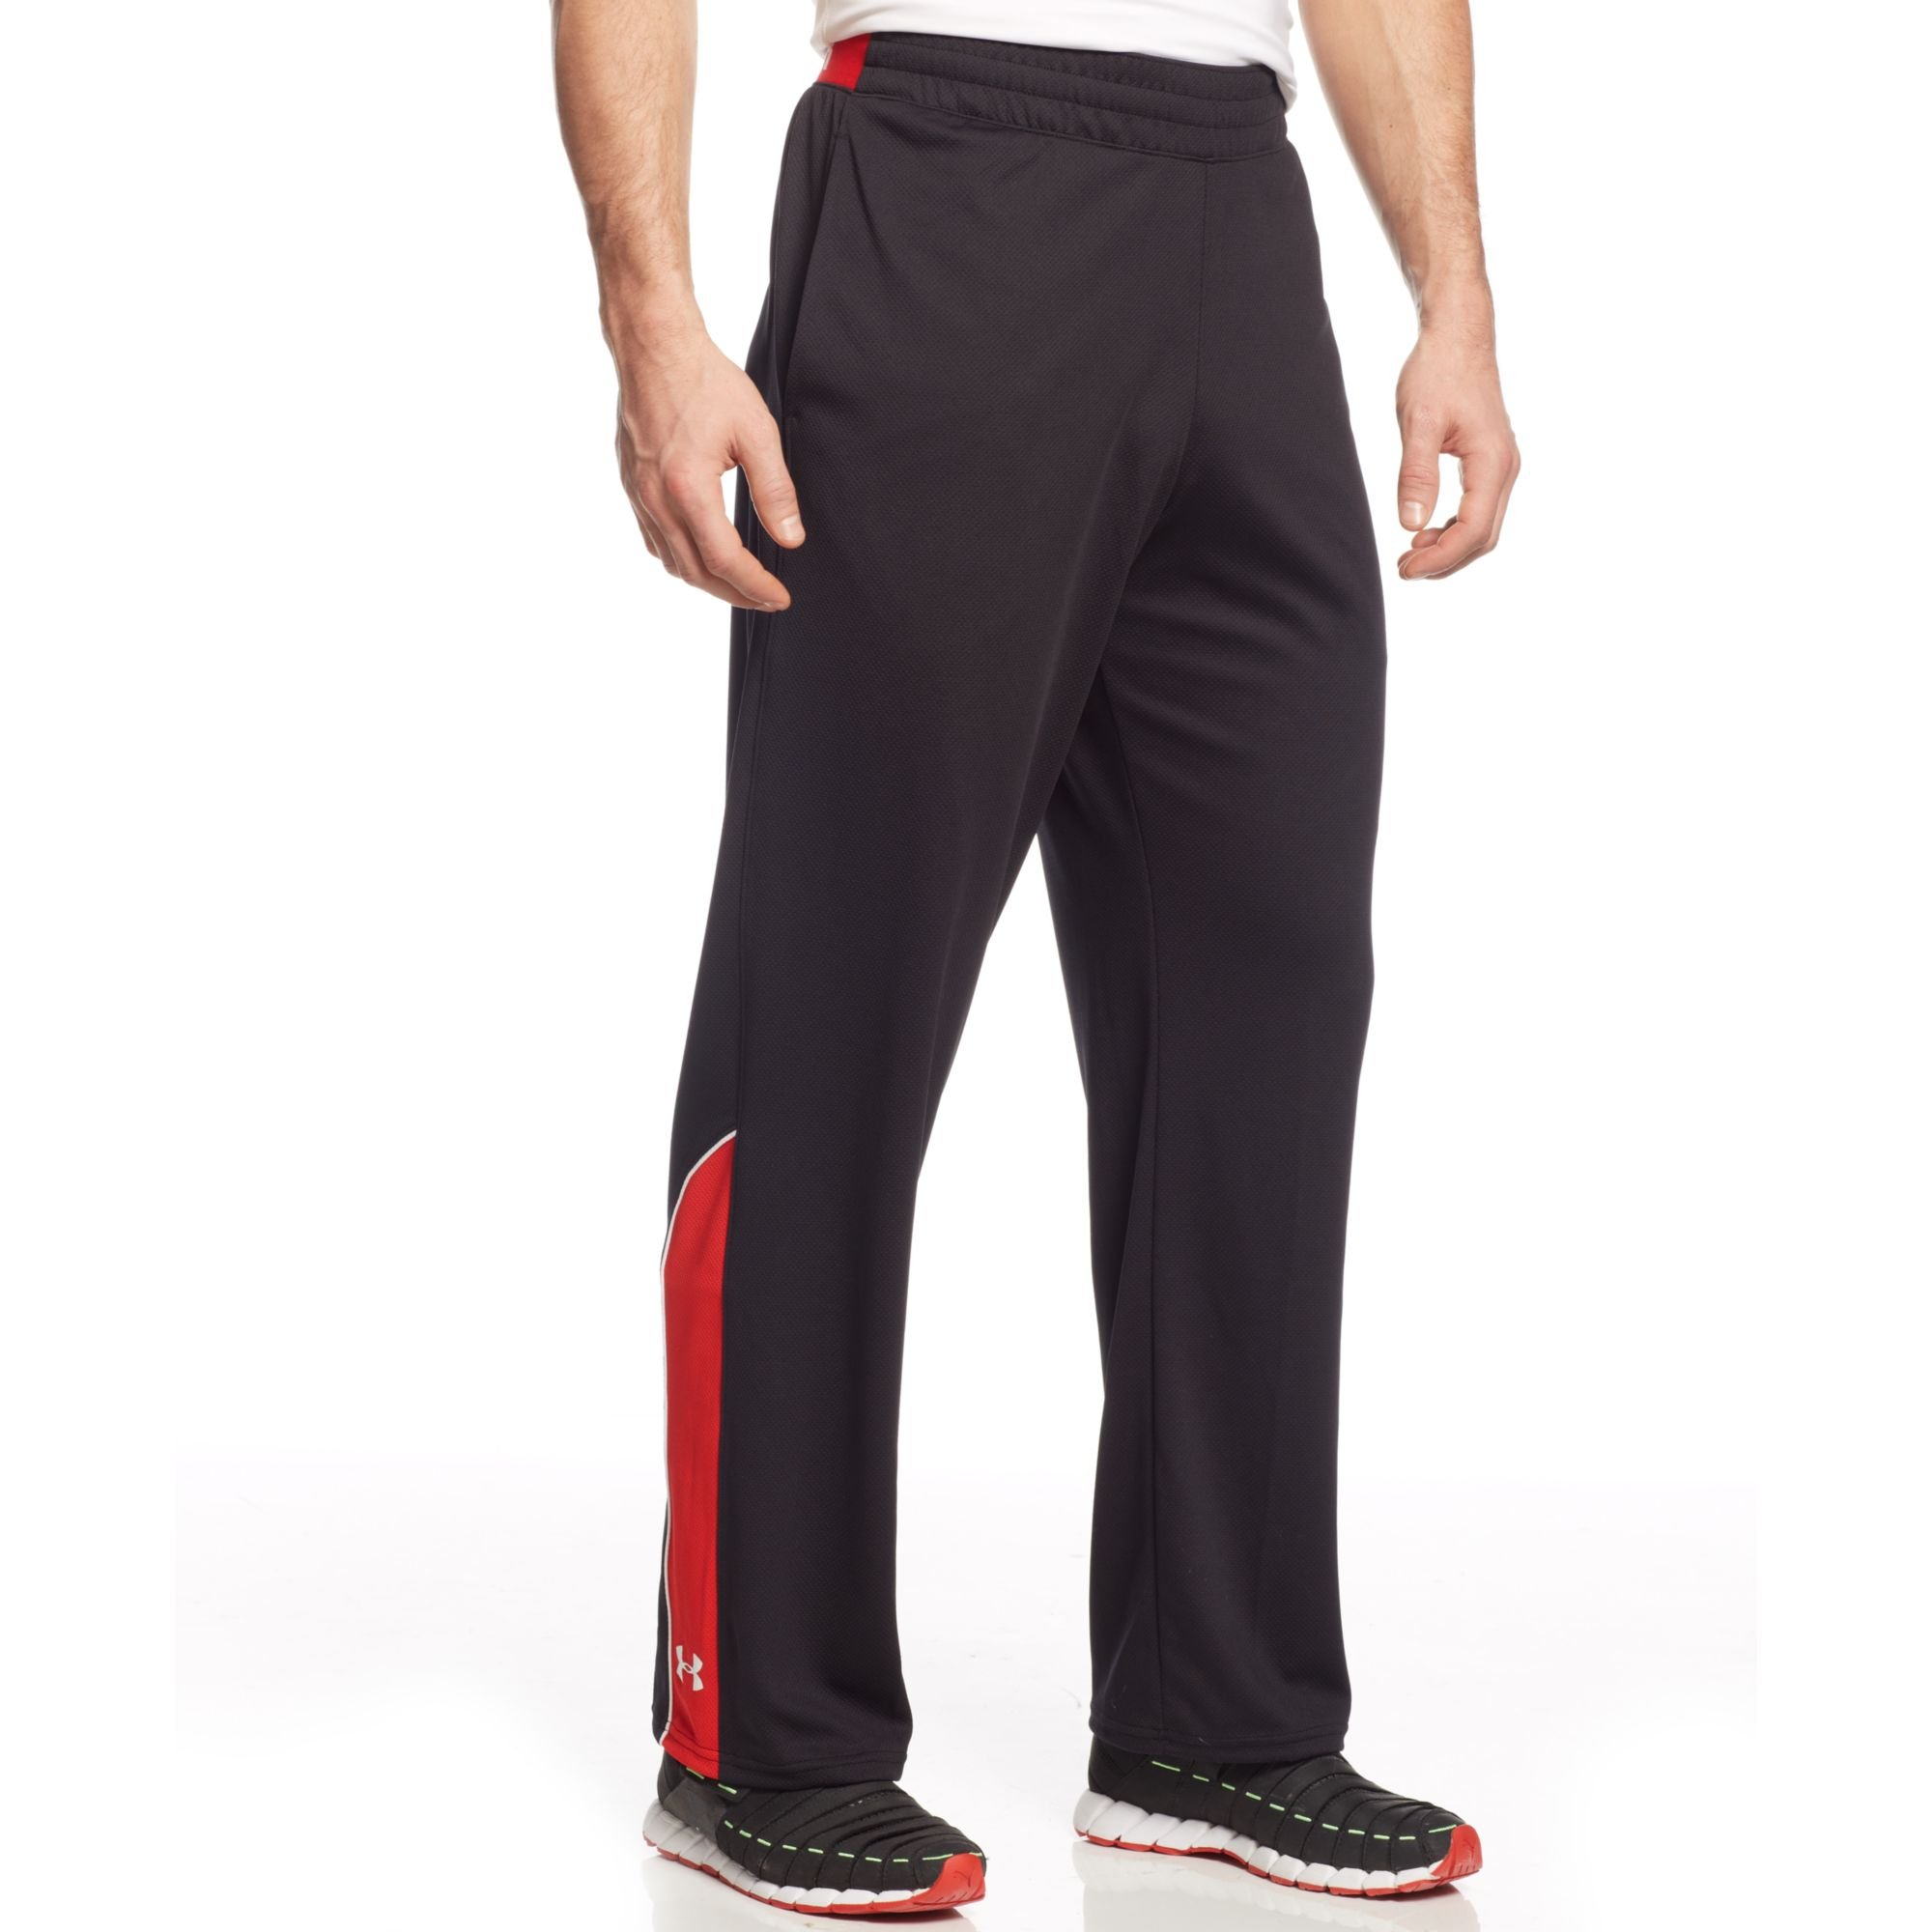 Lyst - Under Armour Reflex Mesh Track Pants in Black for Men